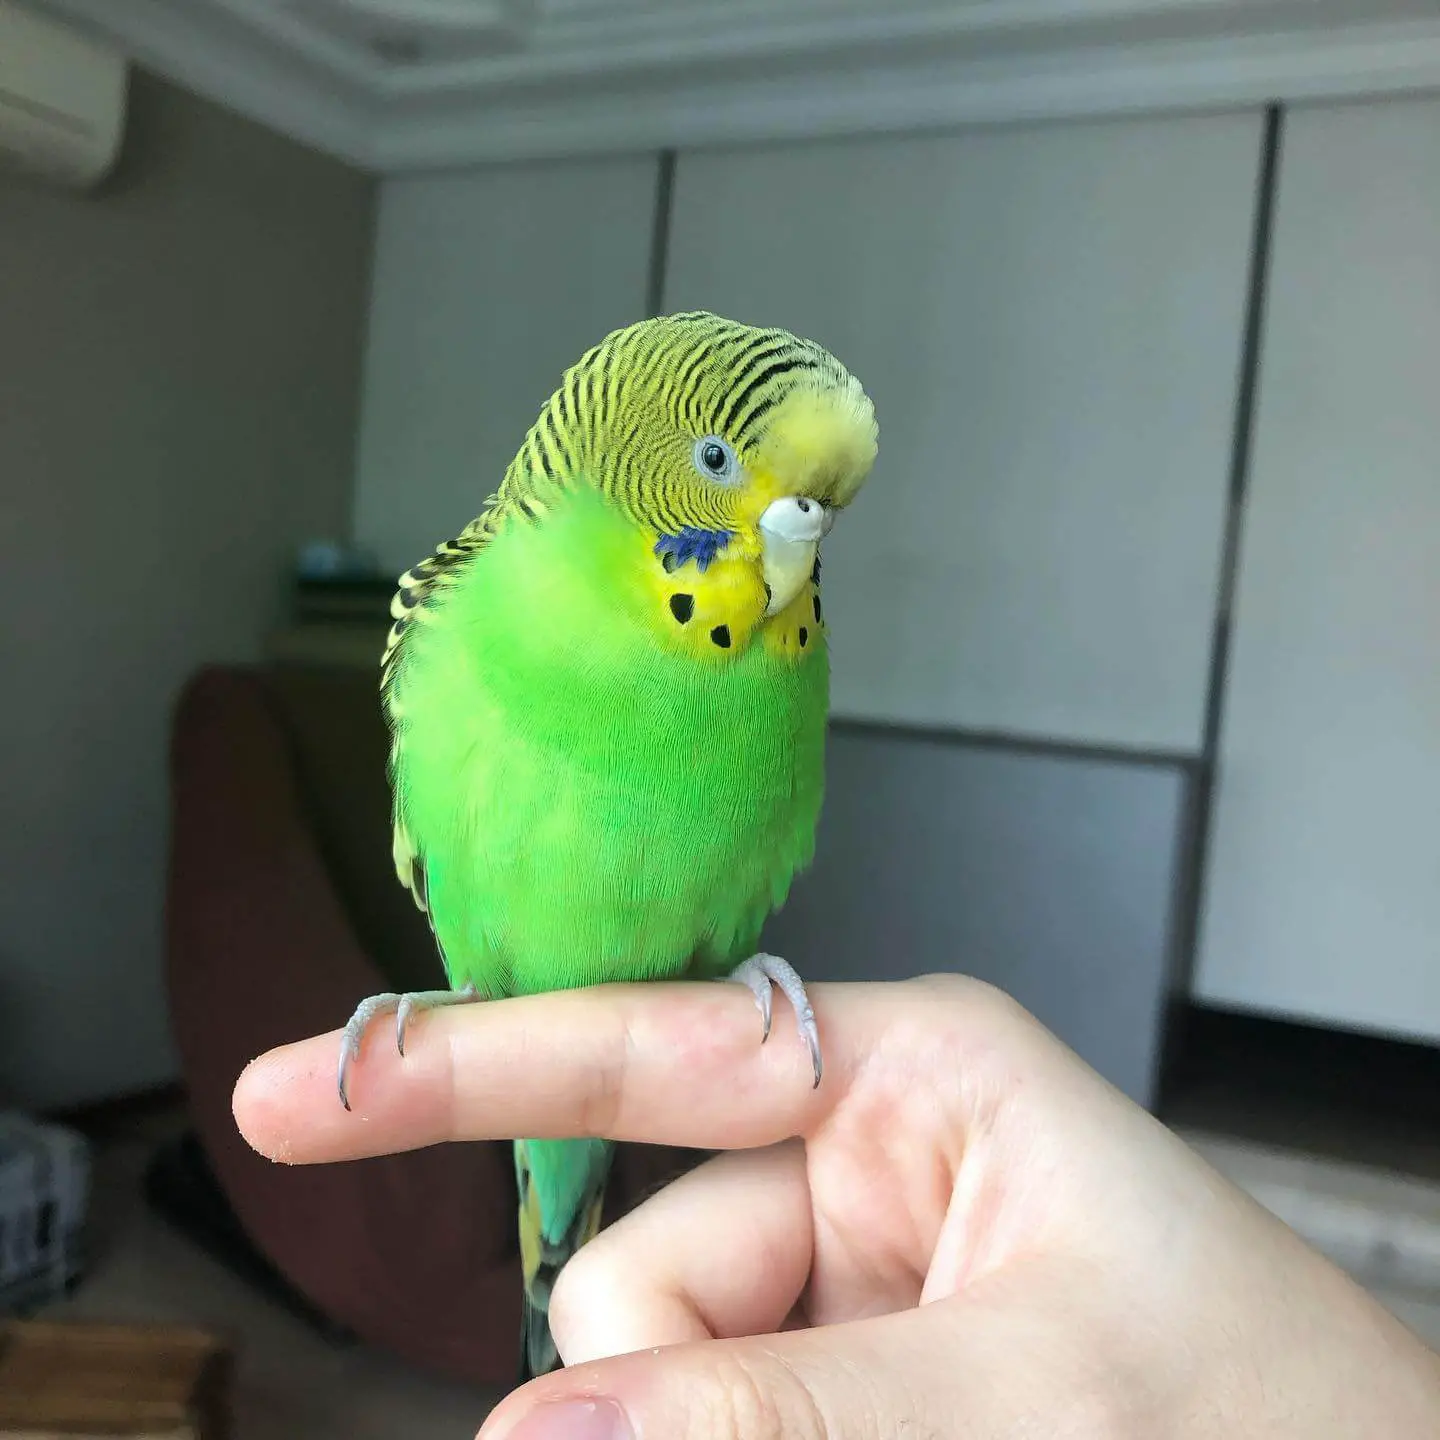 Fun Ideas for Training Your Budgie: Treats, Tricks, and More